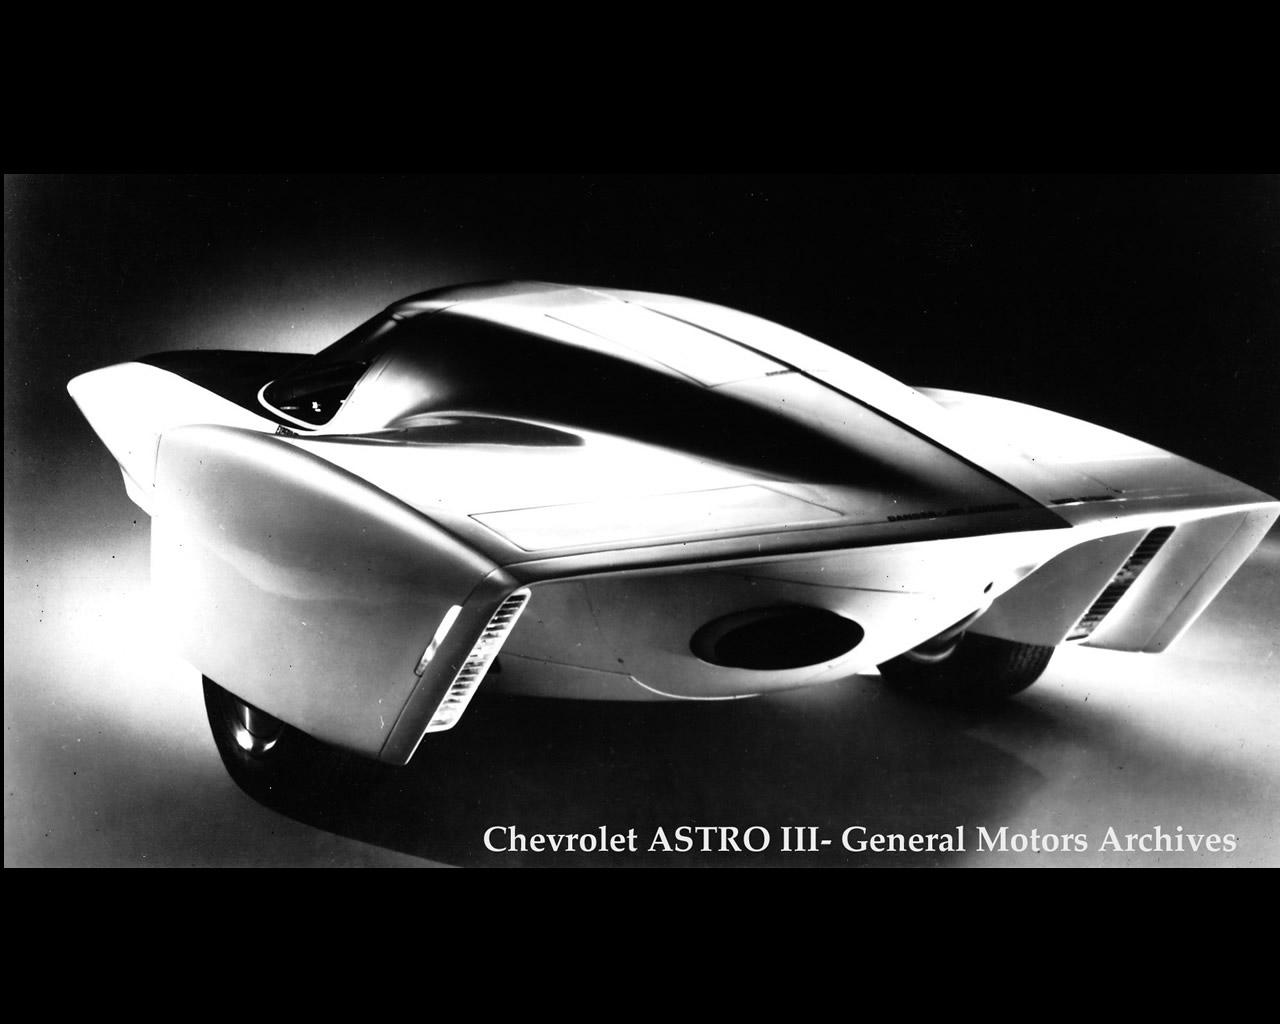 1969 Chevrolet Astro III Concept Backgrounds, Compatible - PC, Mobile, Gadgets| 1280x1024 px